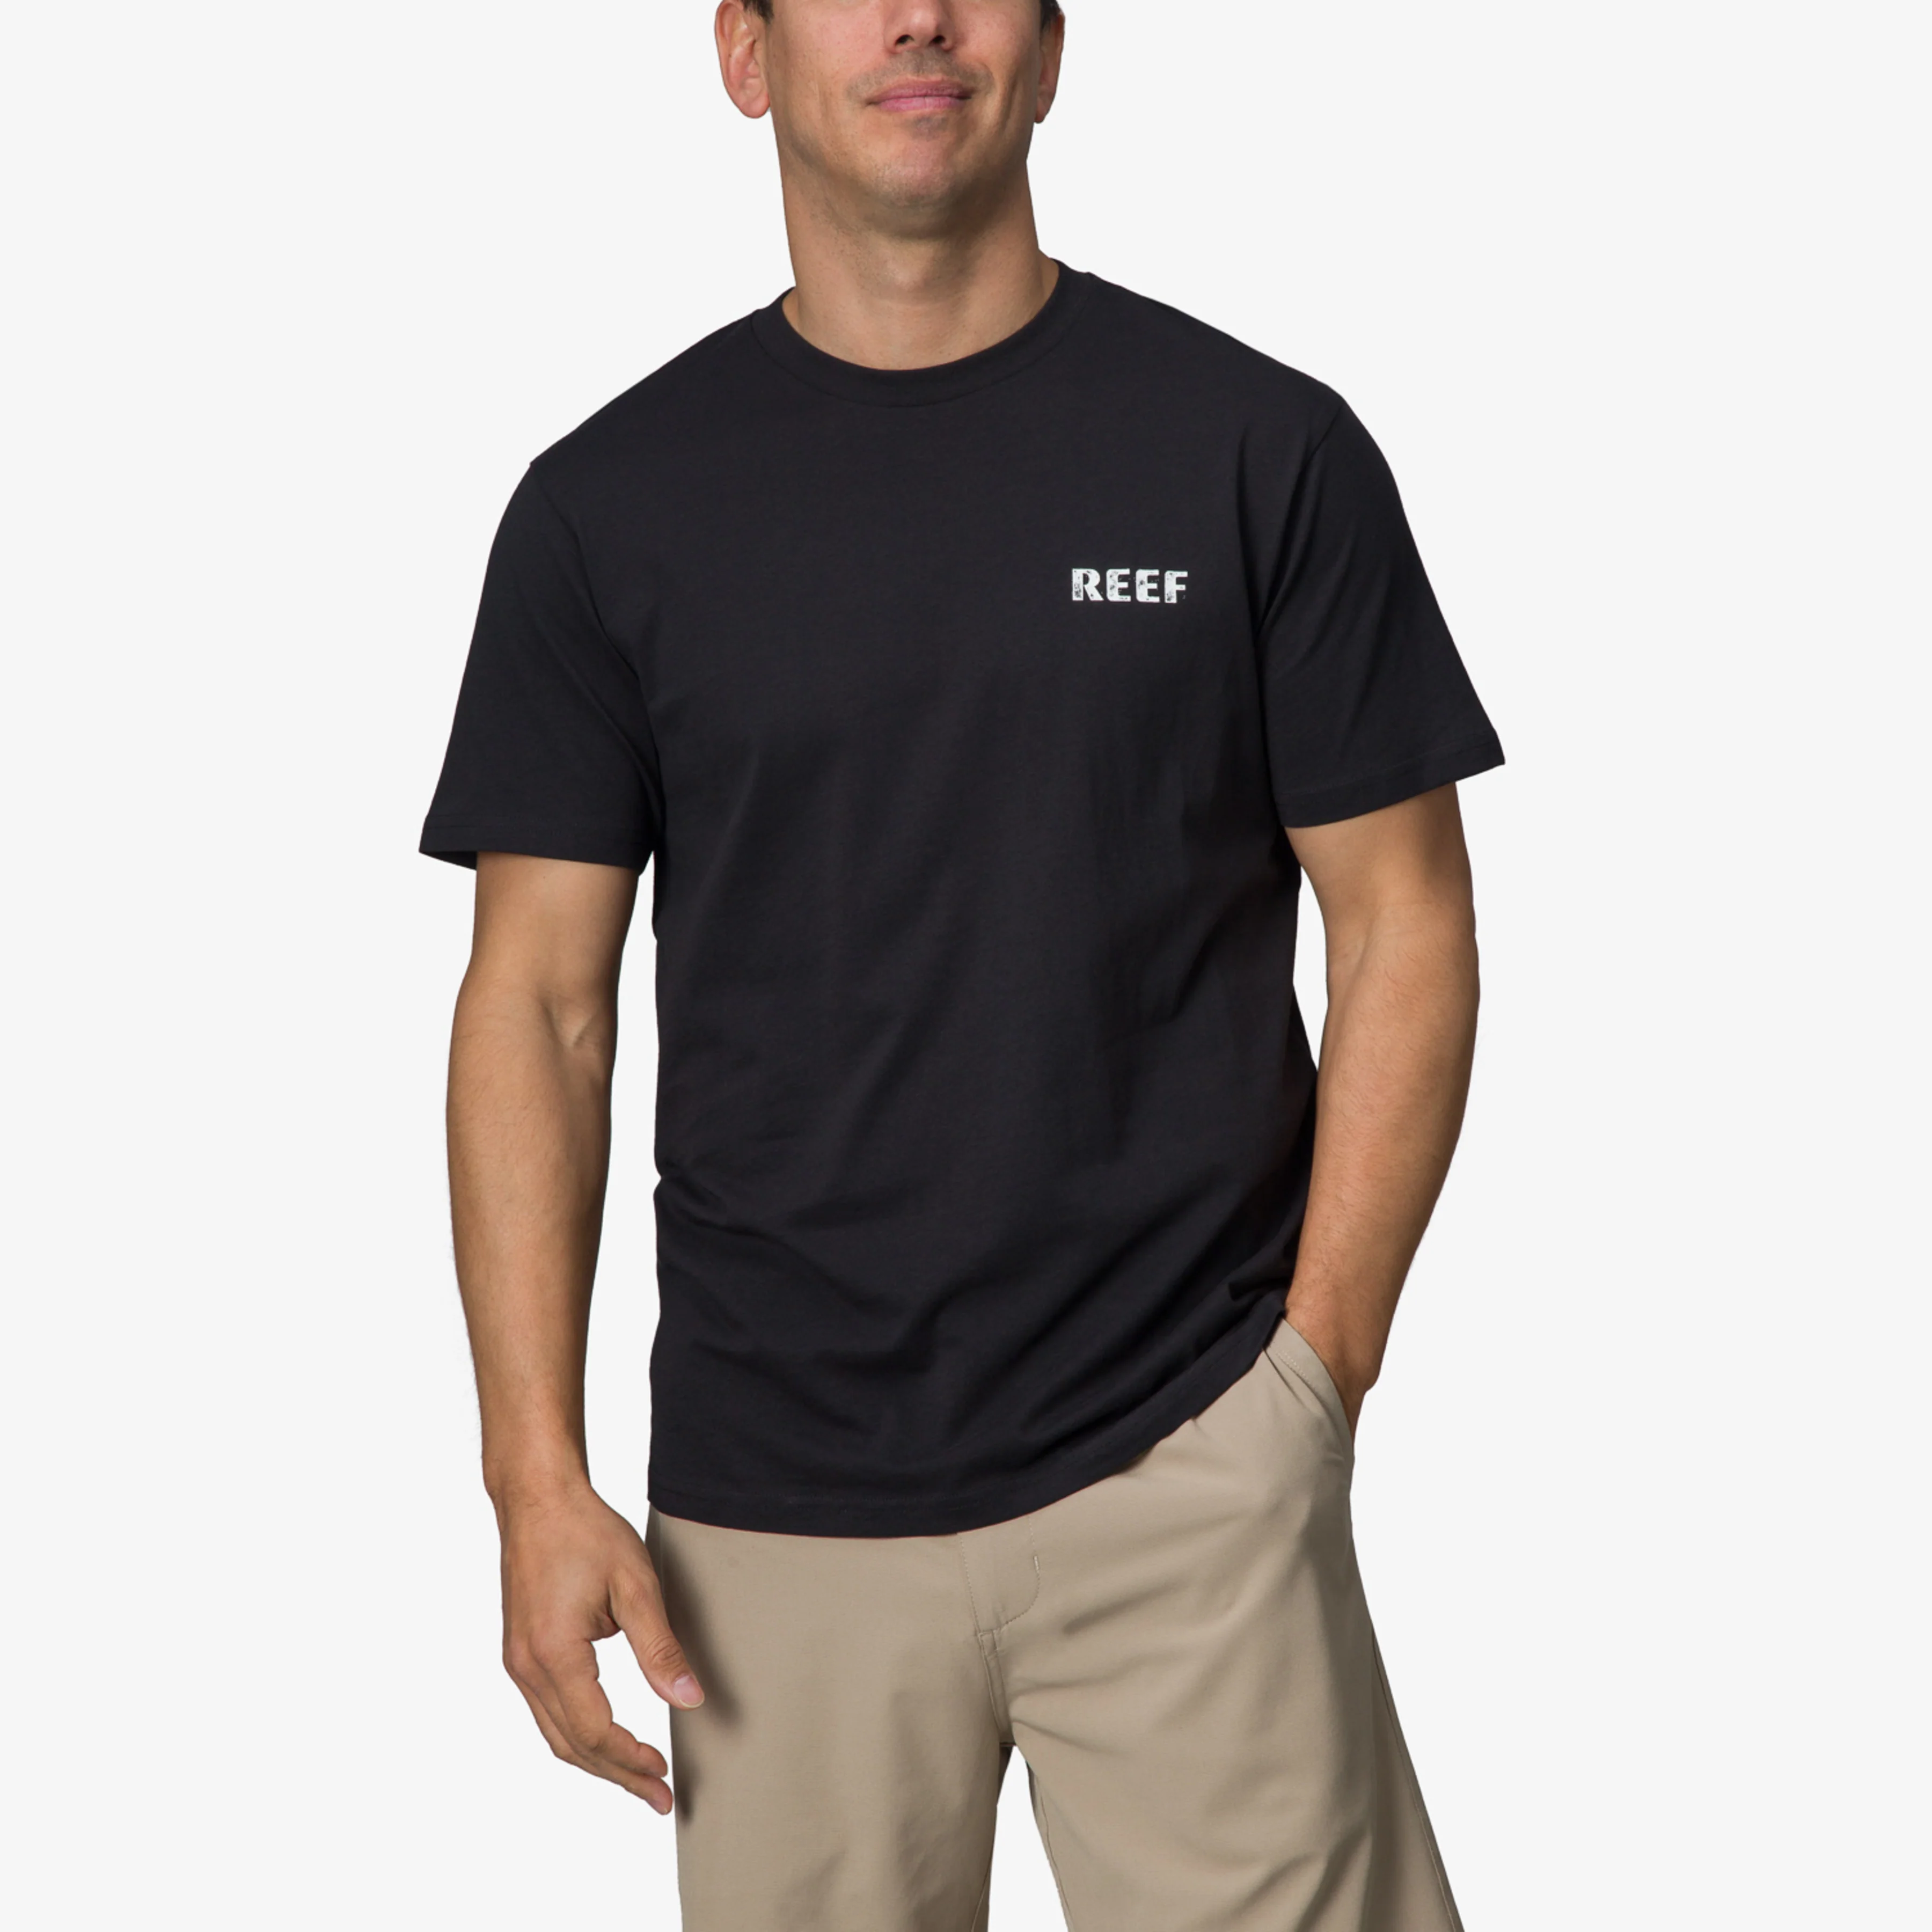 Mens black t shirt with REEF logo on top left